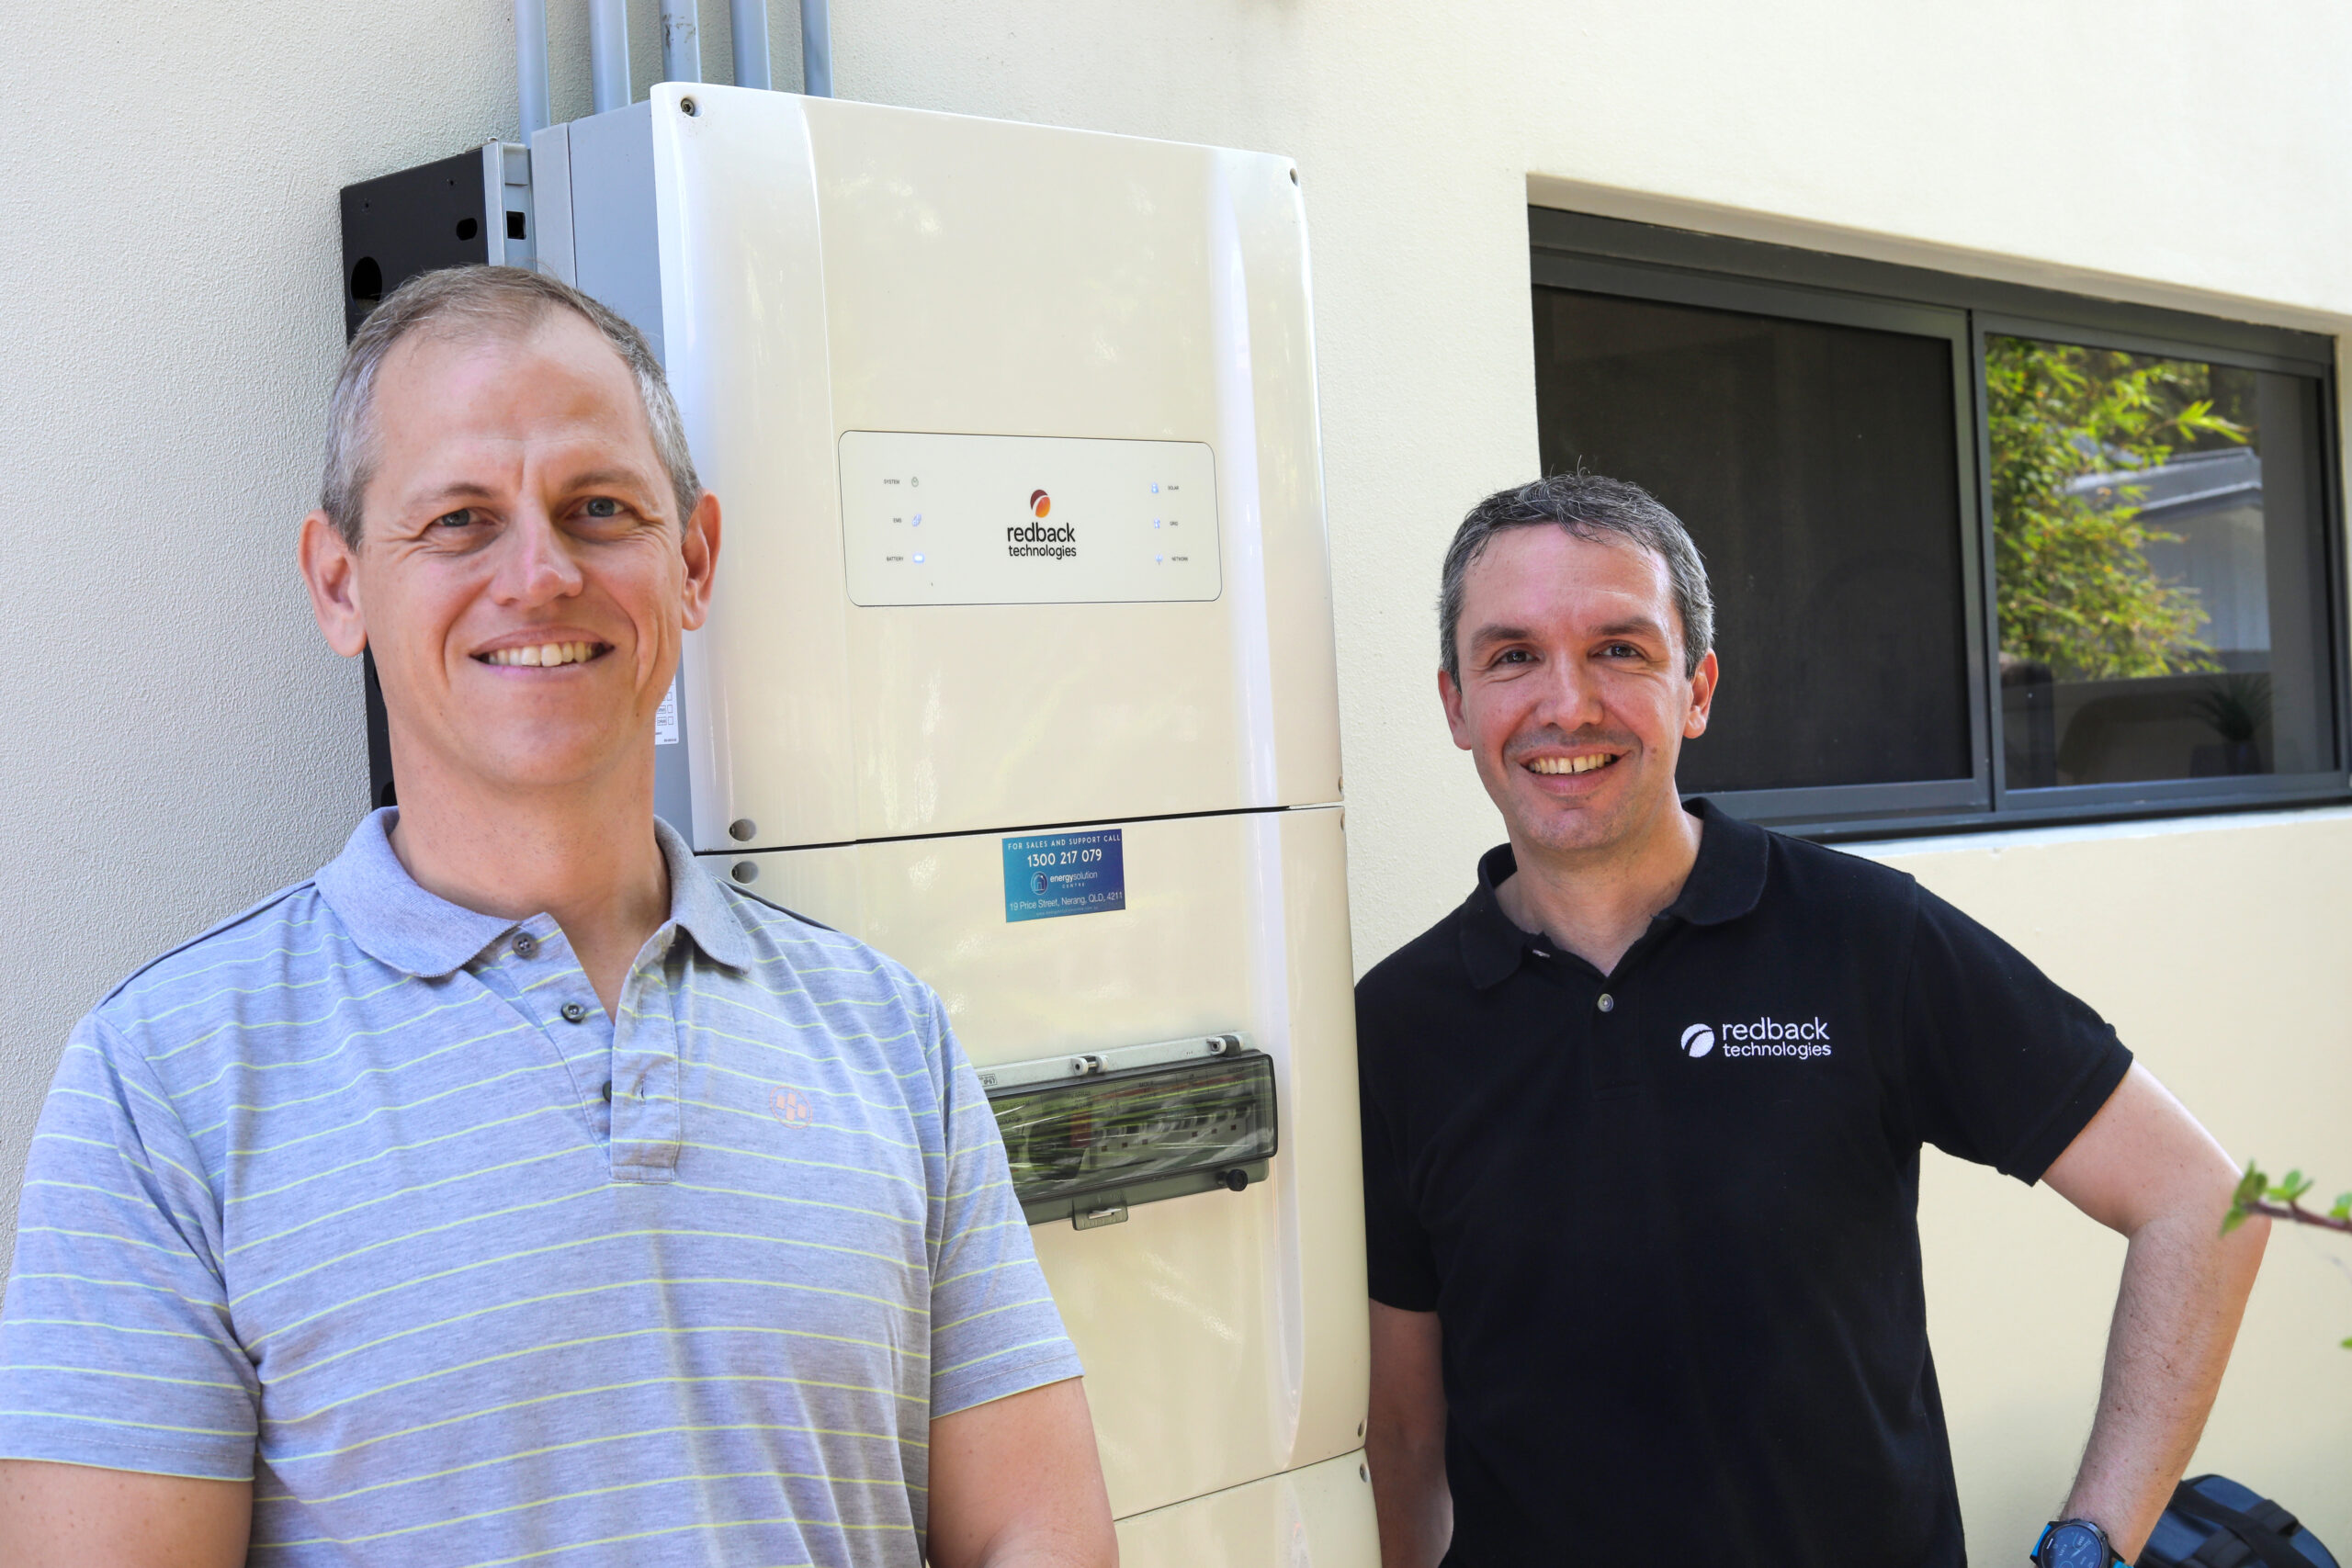 One of the Redback Technologies team with a Channel 10 News presenter standing by a Redback Technologies solar unit